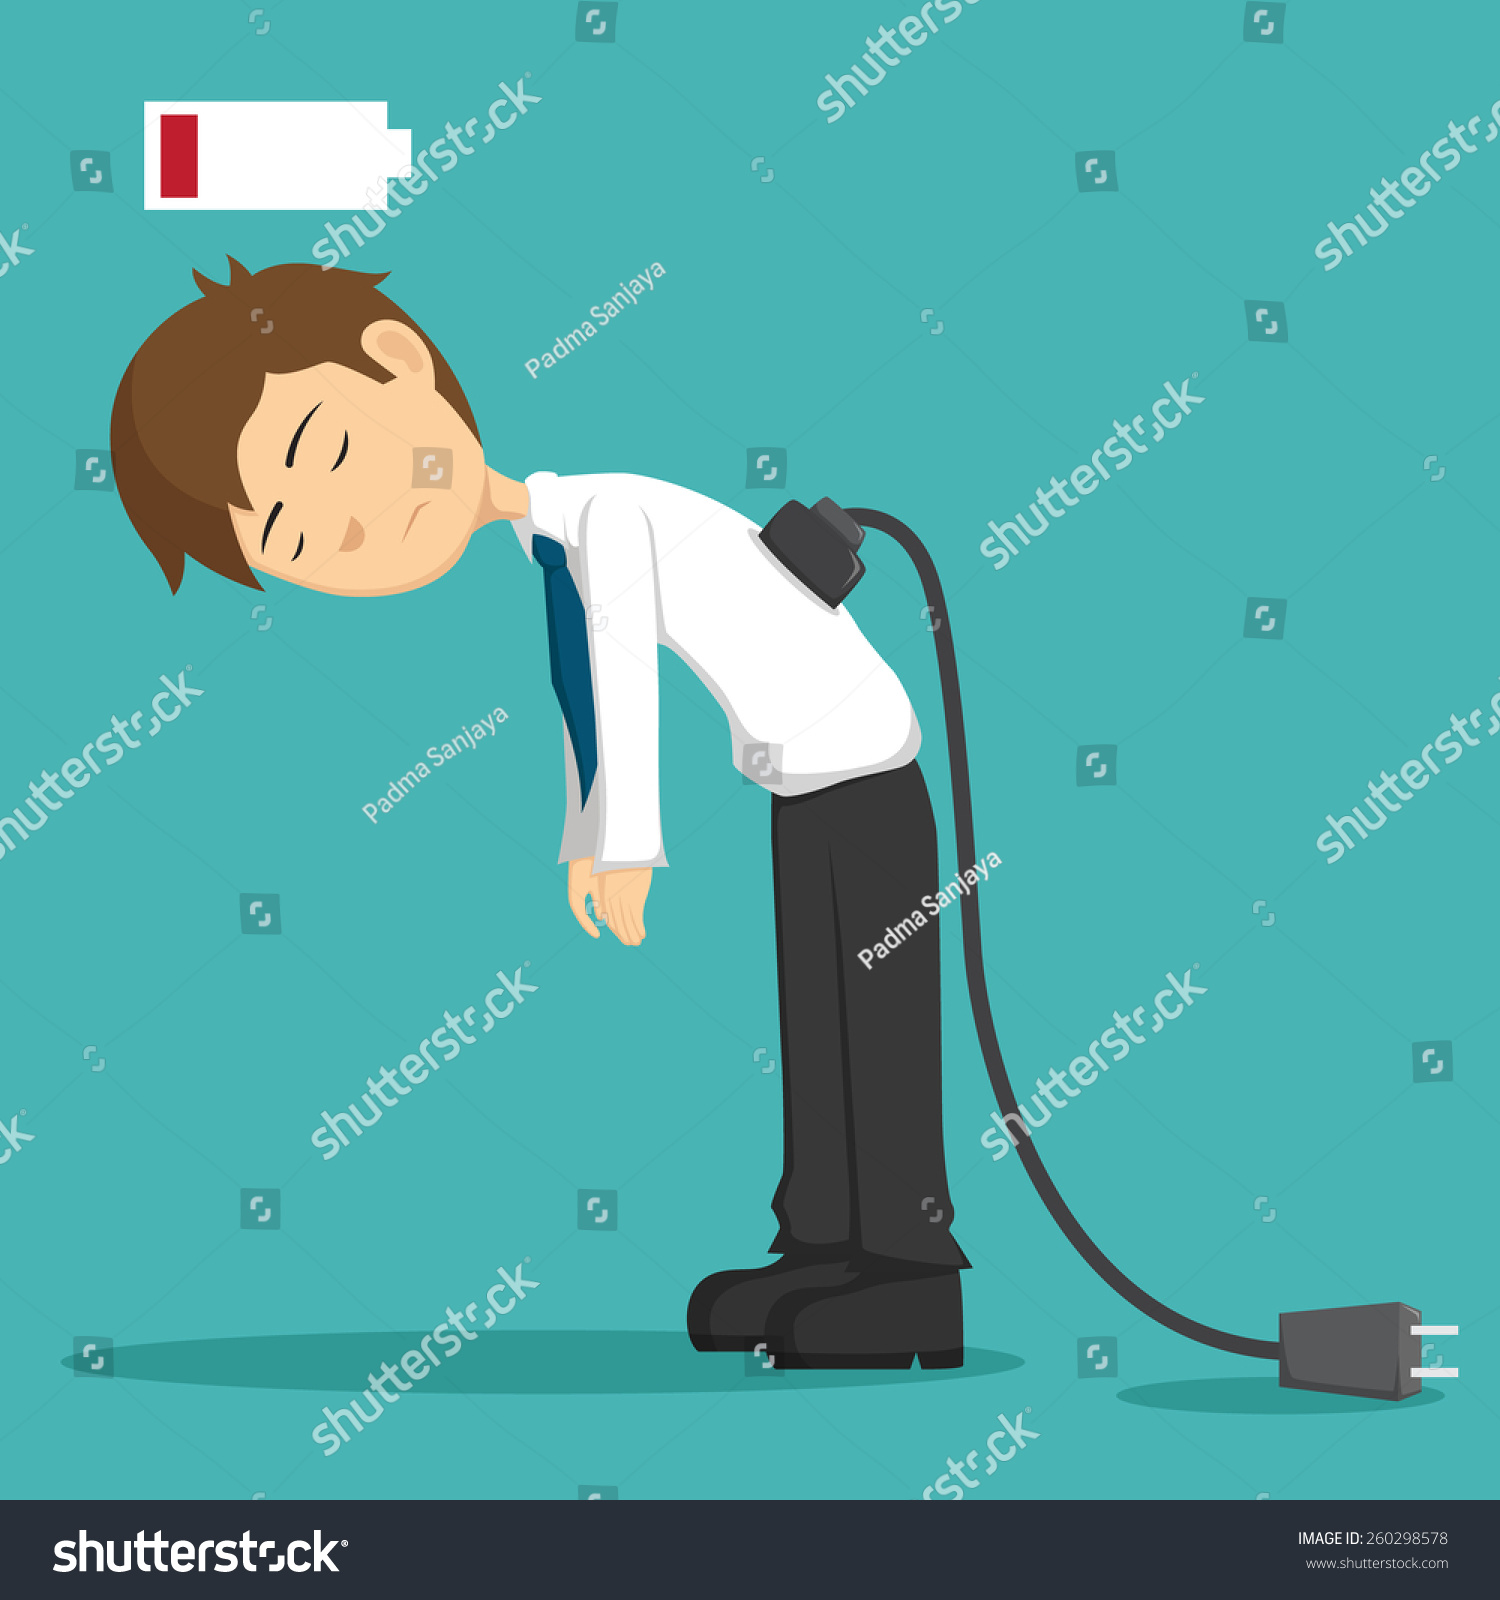 exhausted man clipart - photo #49